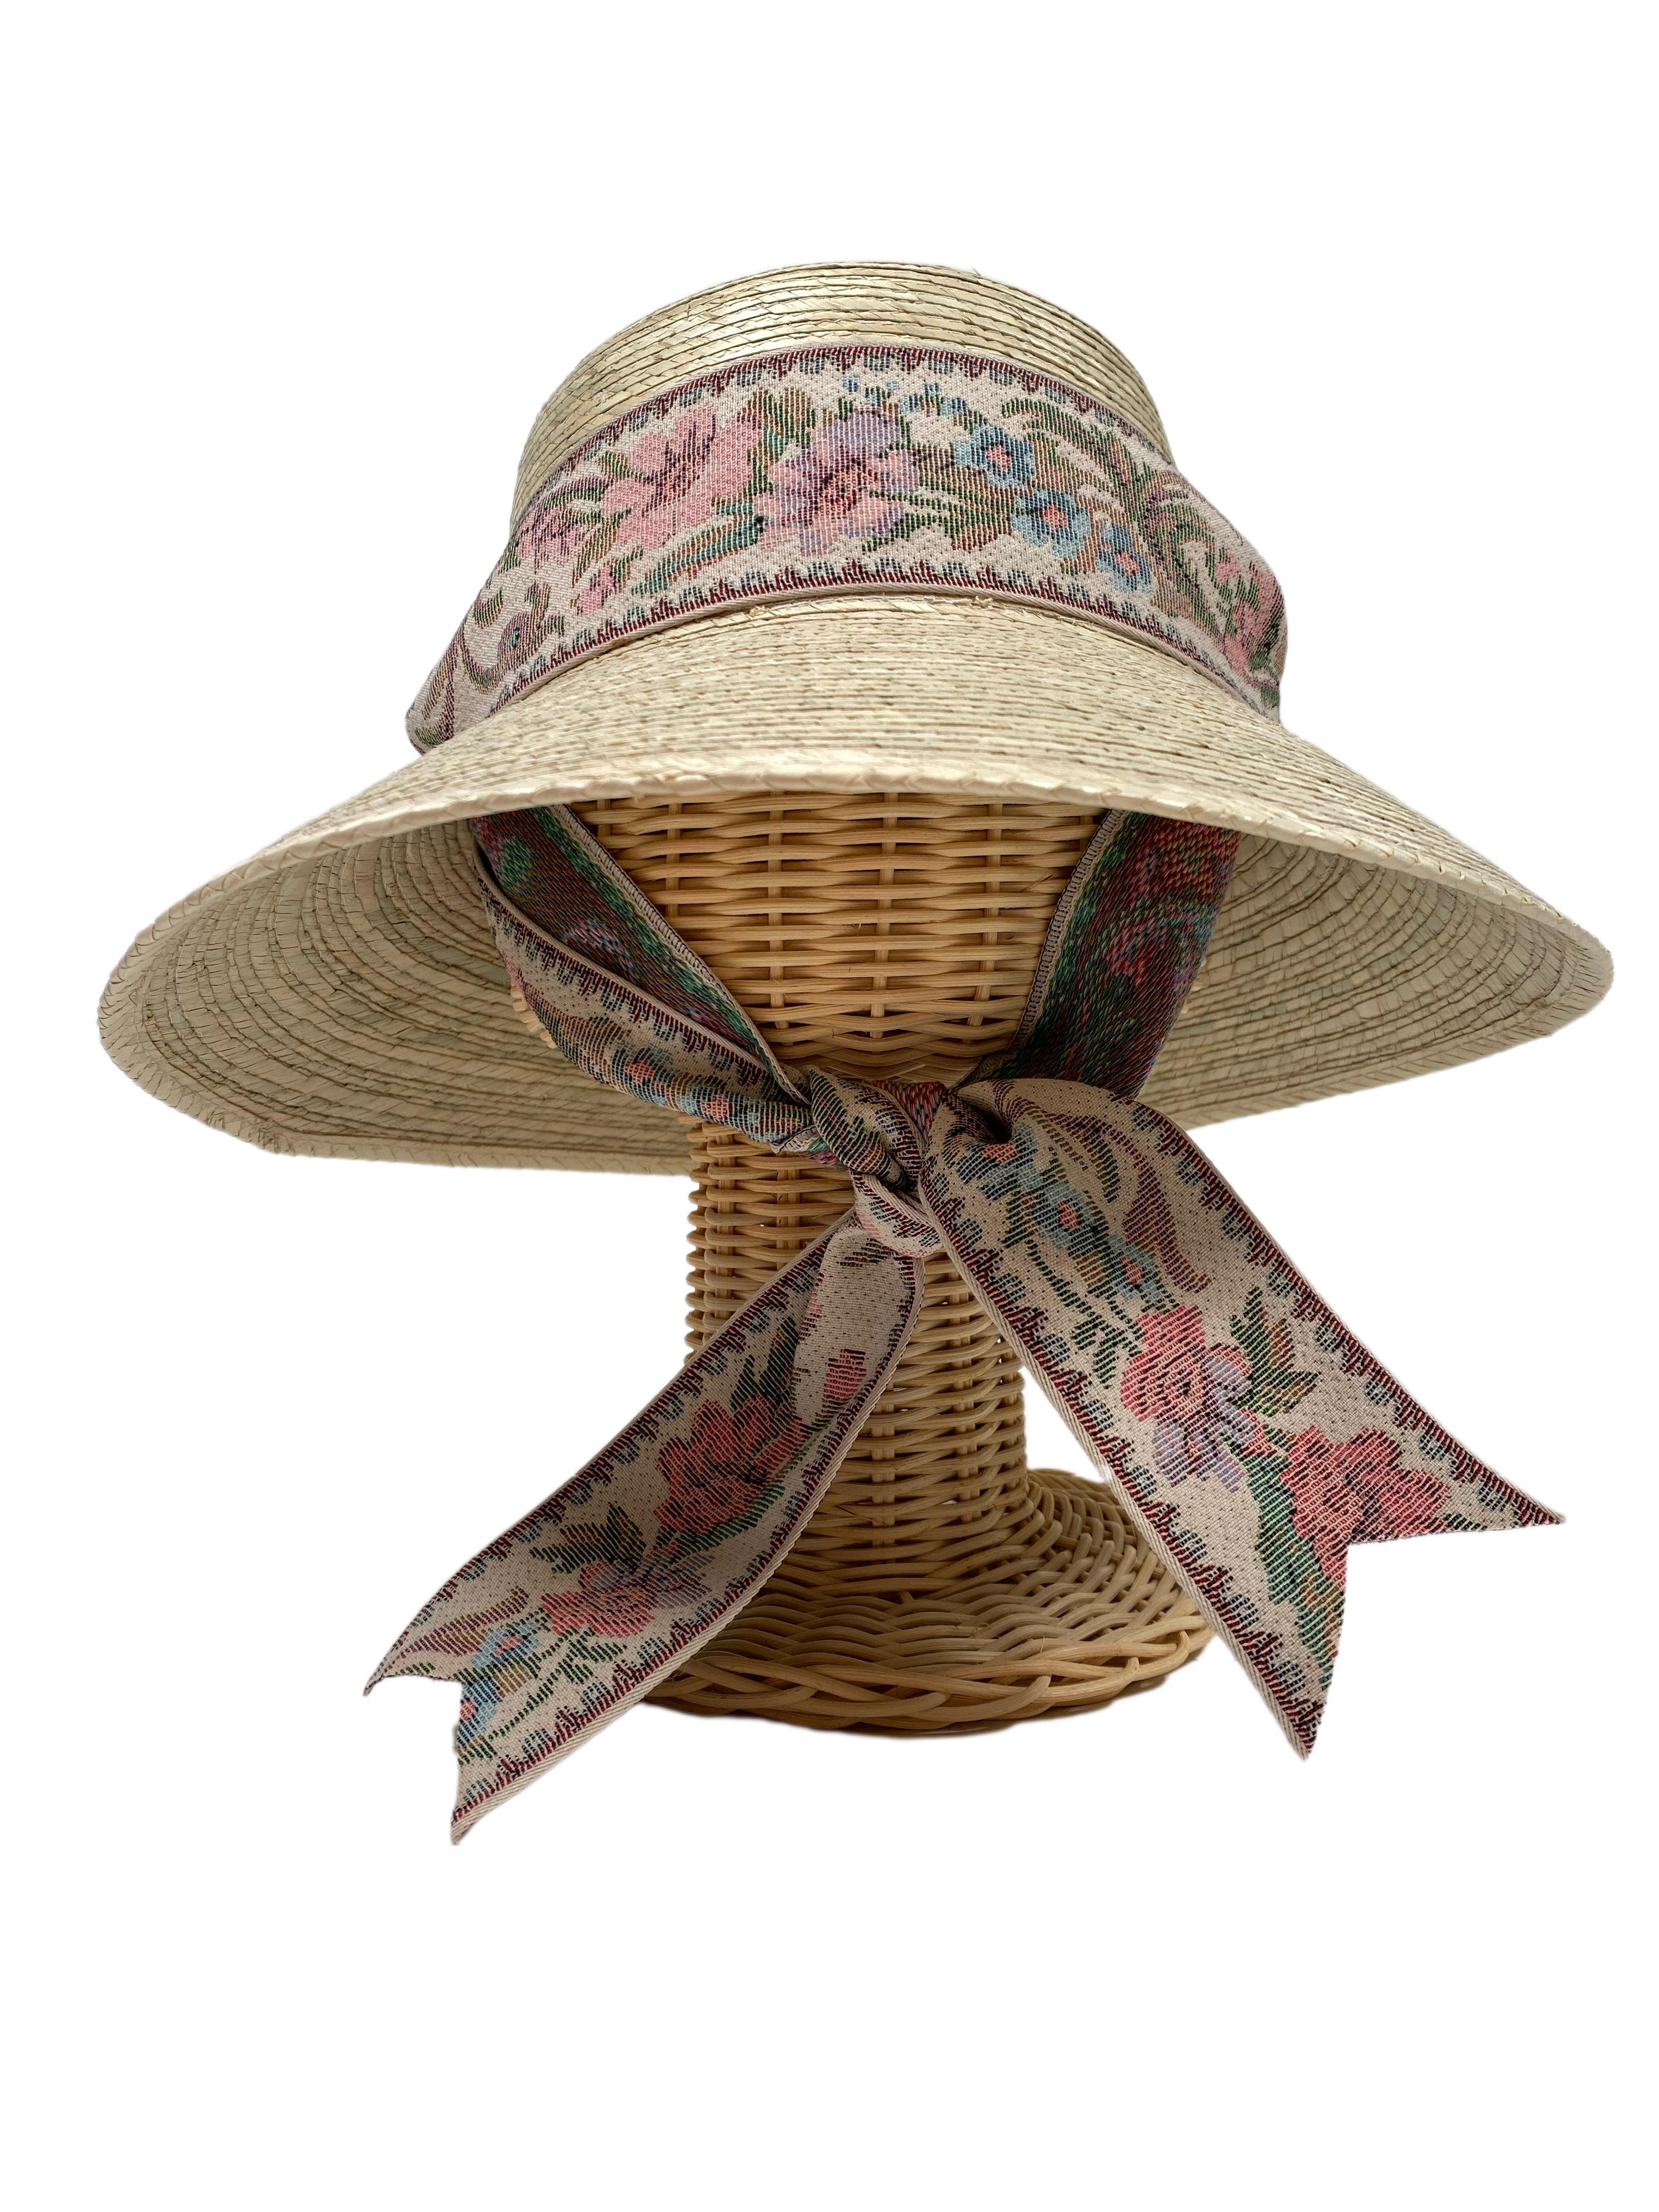 Clematis Bucket Hat - Antique Tapestry Floral Ribbon